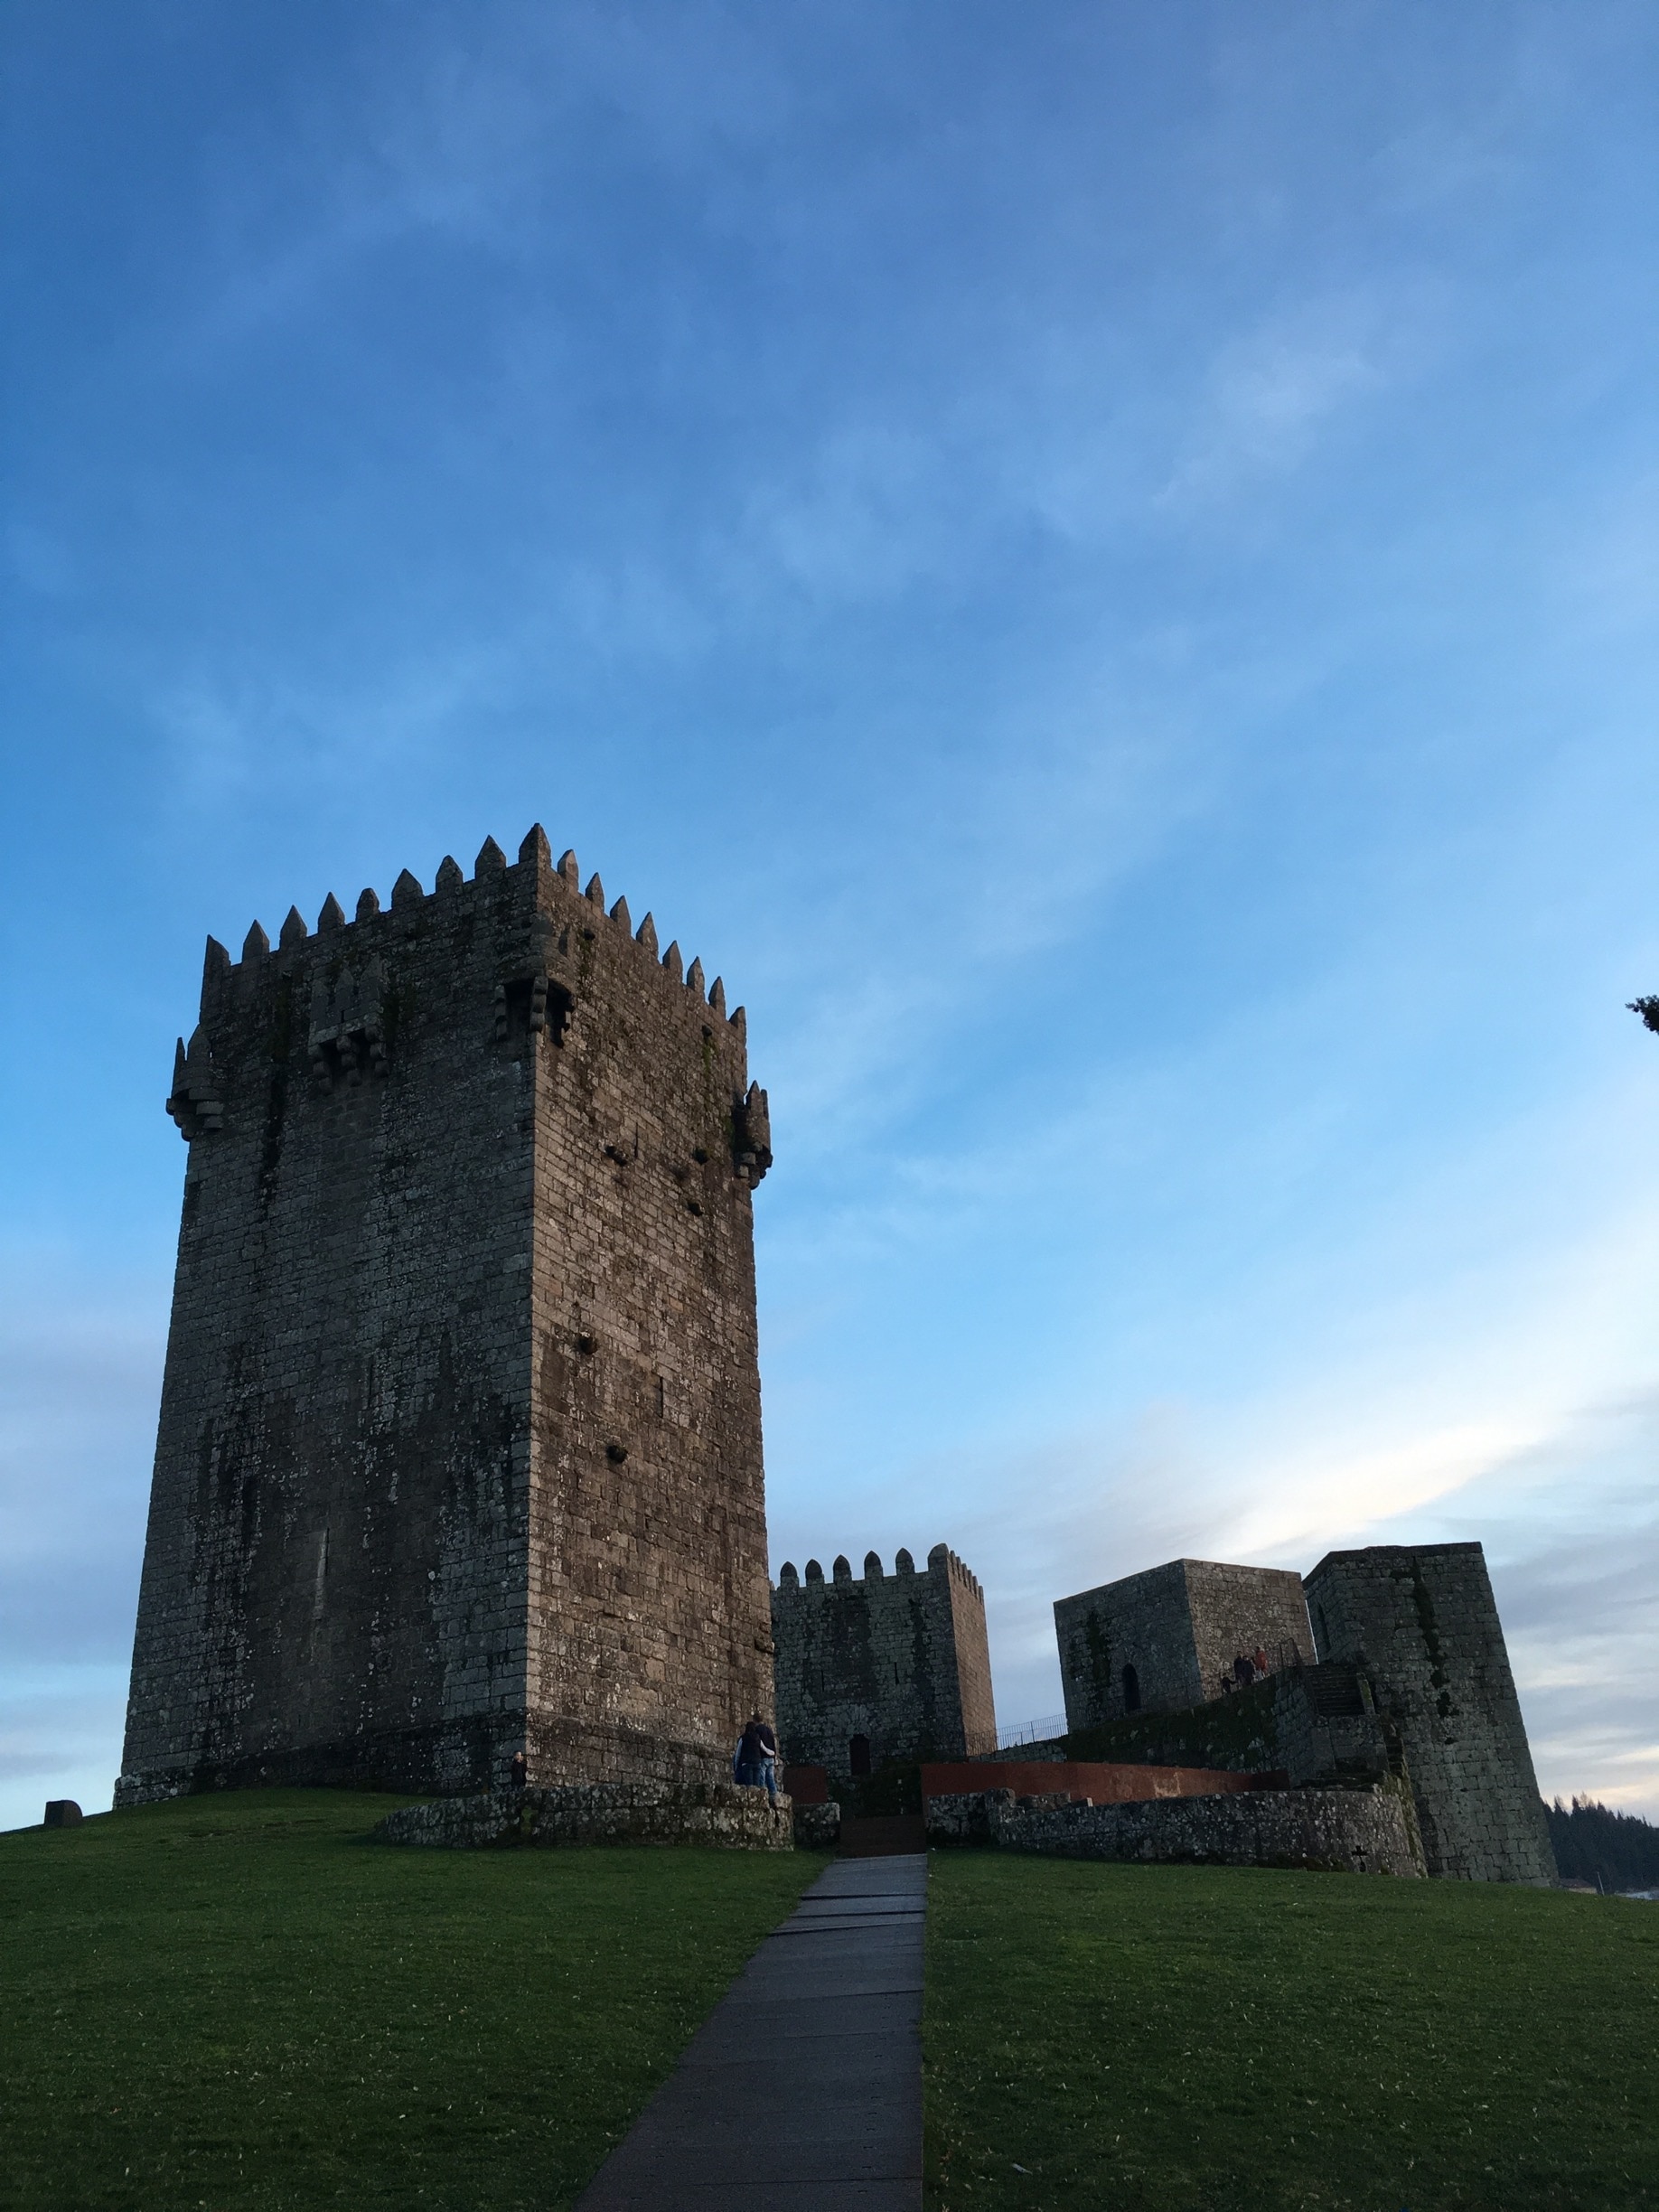 The Castle, with its construction from 1279-1325, is a Portuguese National monument.

Montalegre